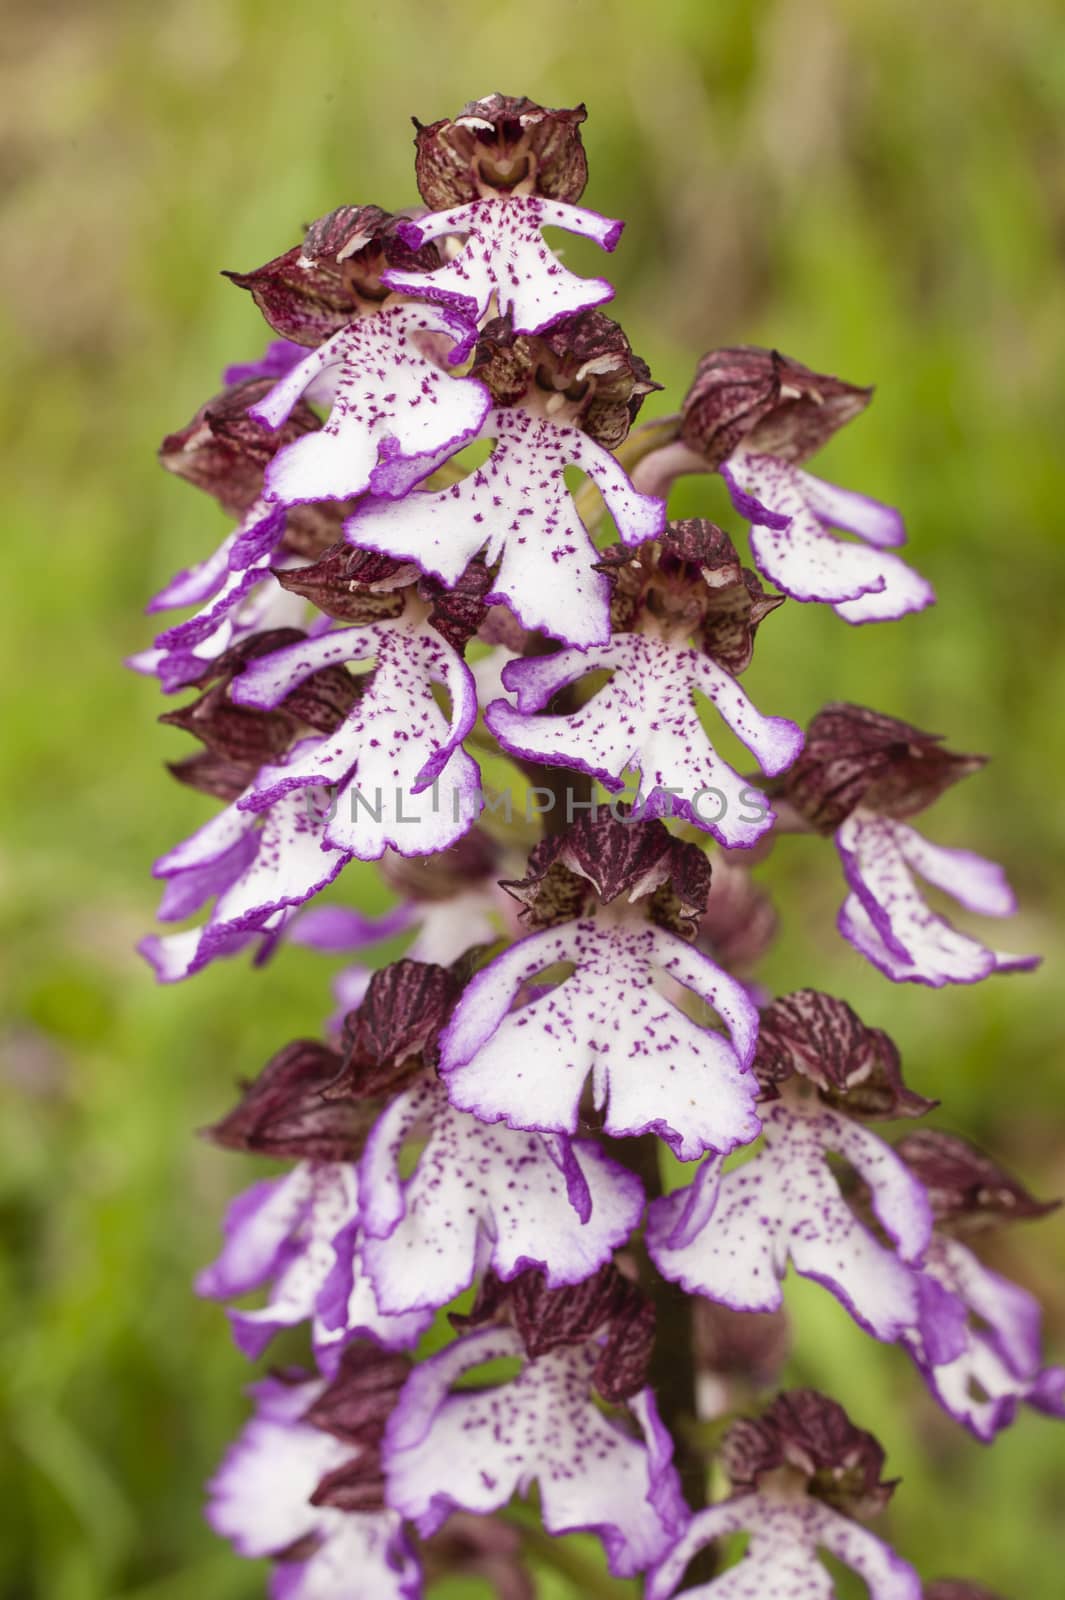 Orchis purpurea, the lady orchid, herbaceous plant belonging to family Orchidaceae in Europe.